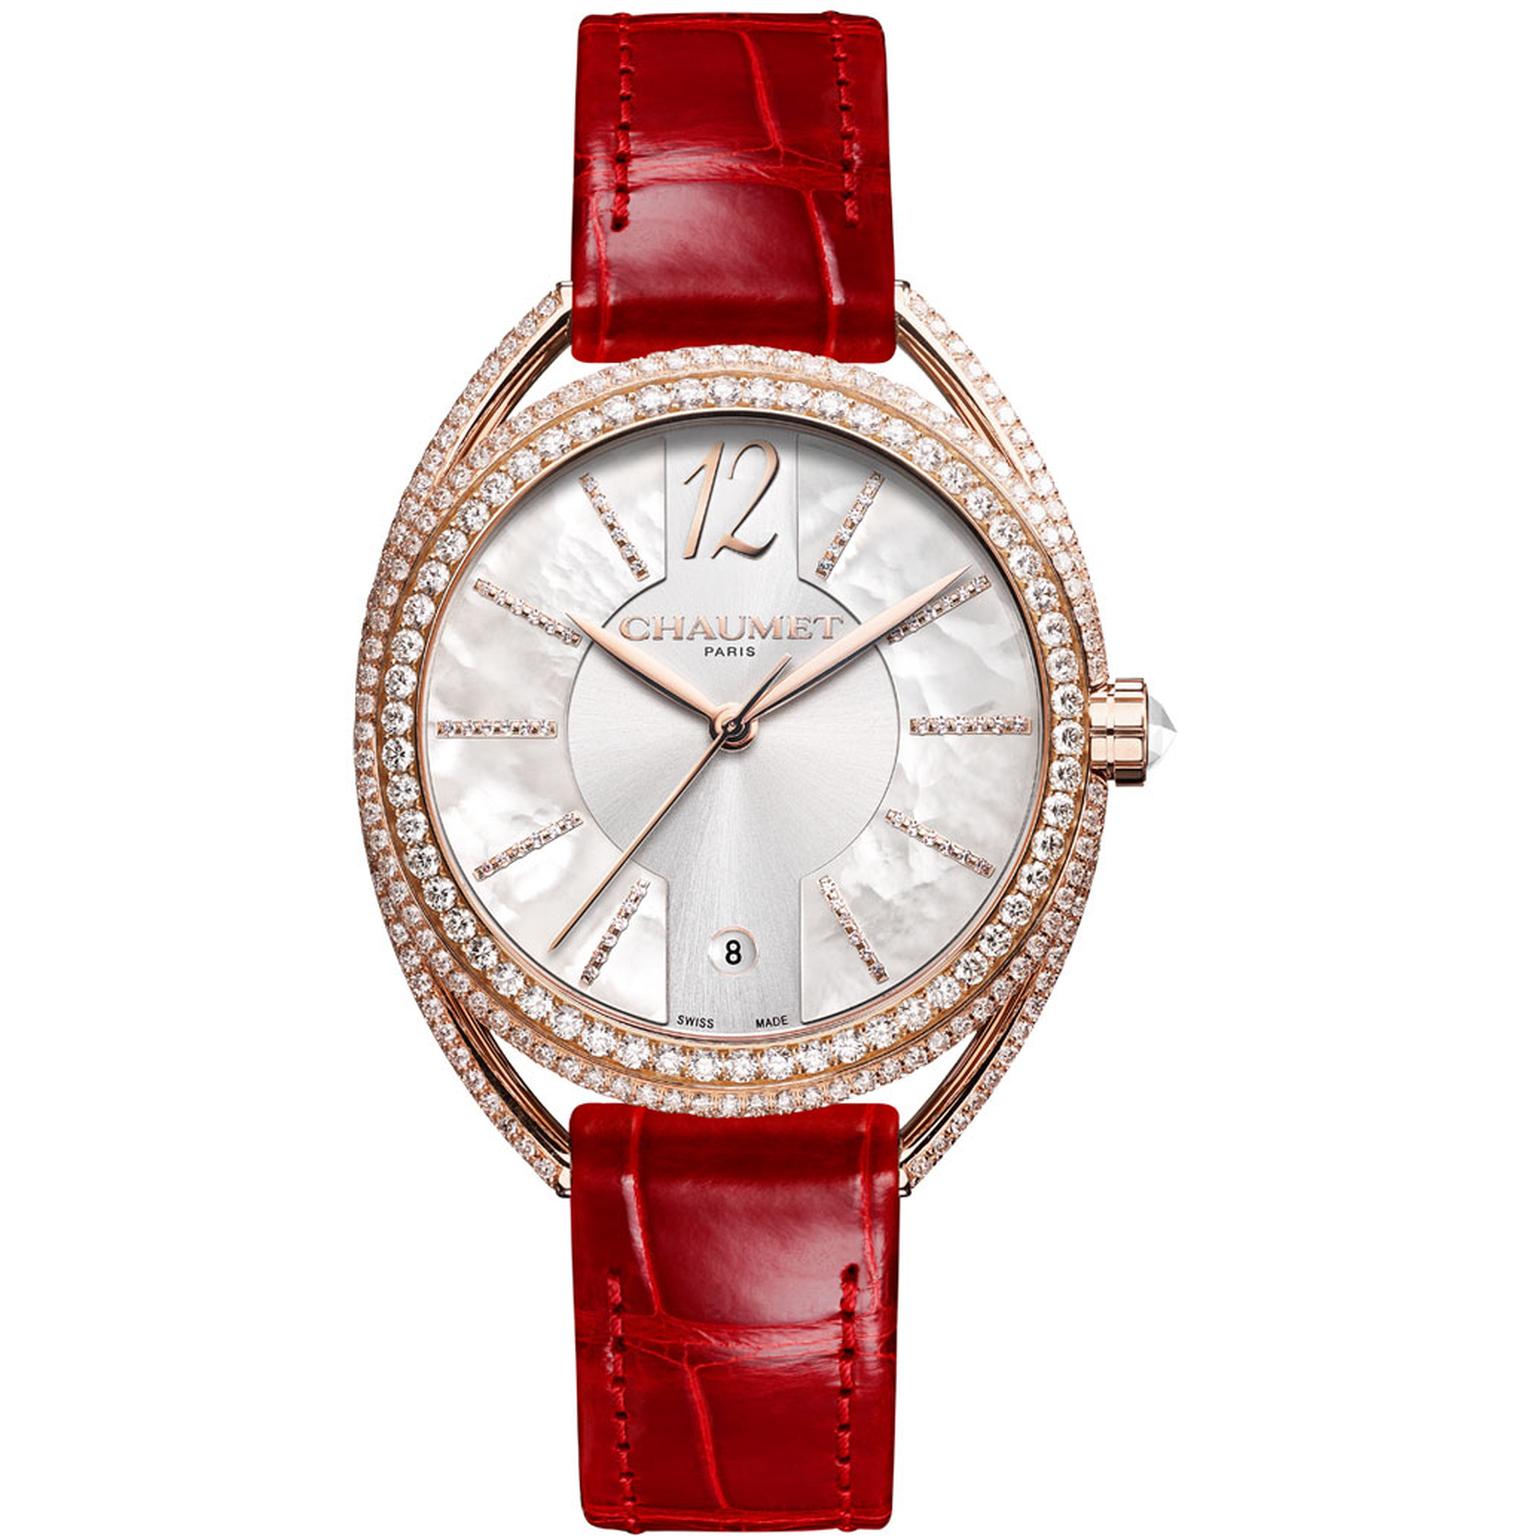 Chaumet Liens Lumière 33mm automatic watch in pink gold with diamonds